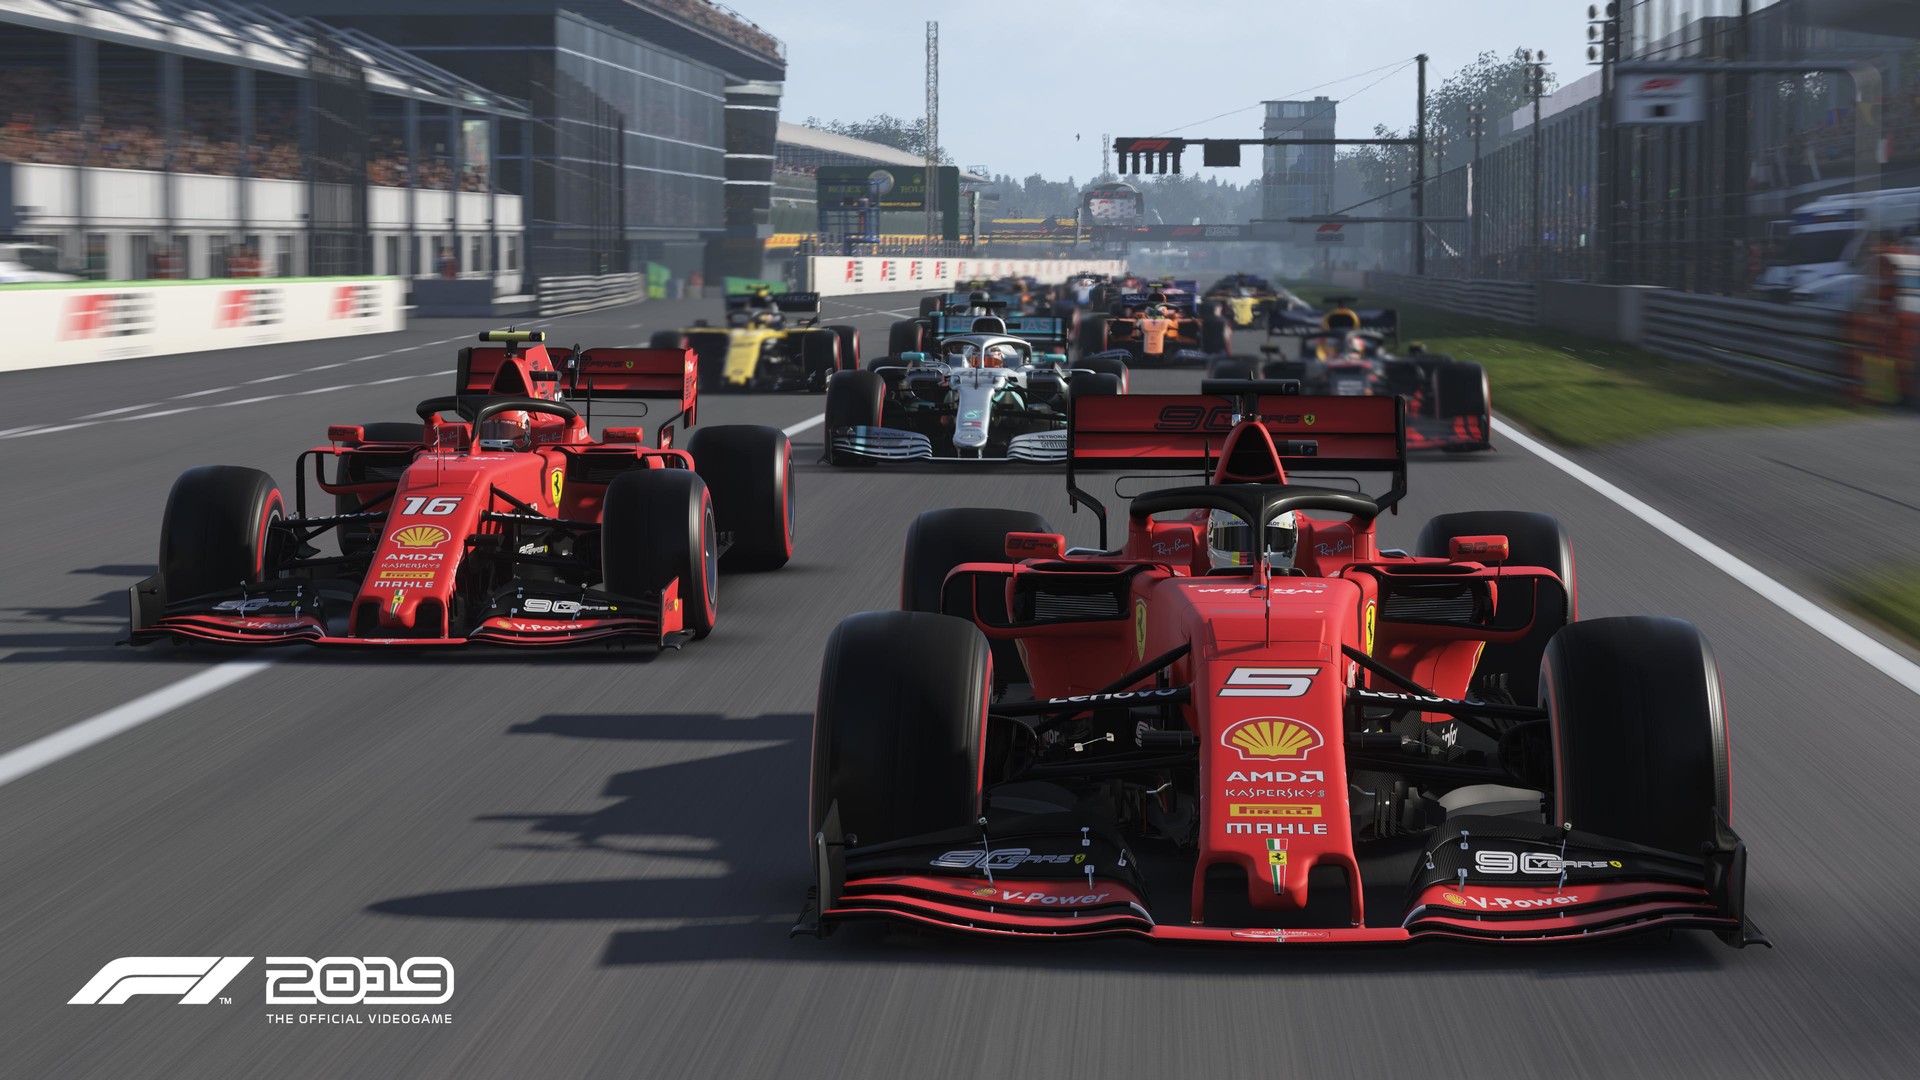 Find the best computers for F1 2019